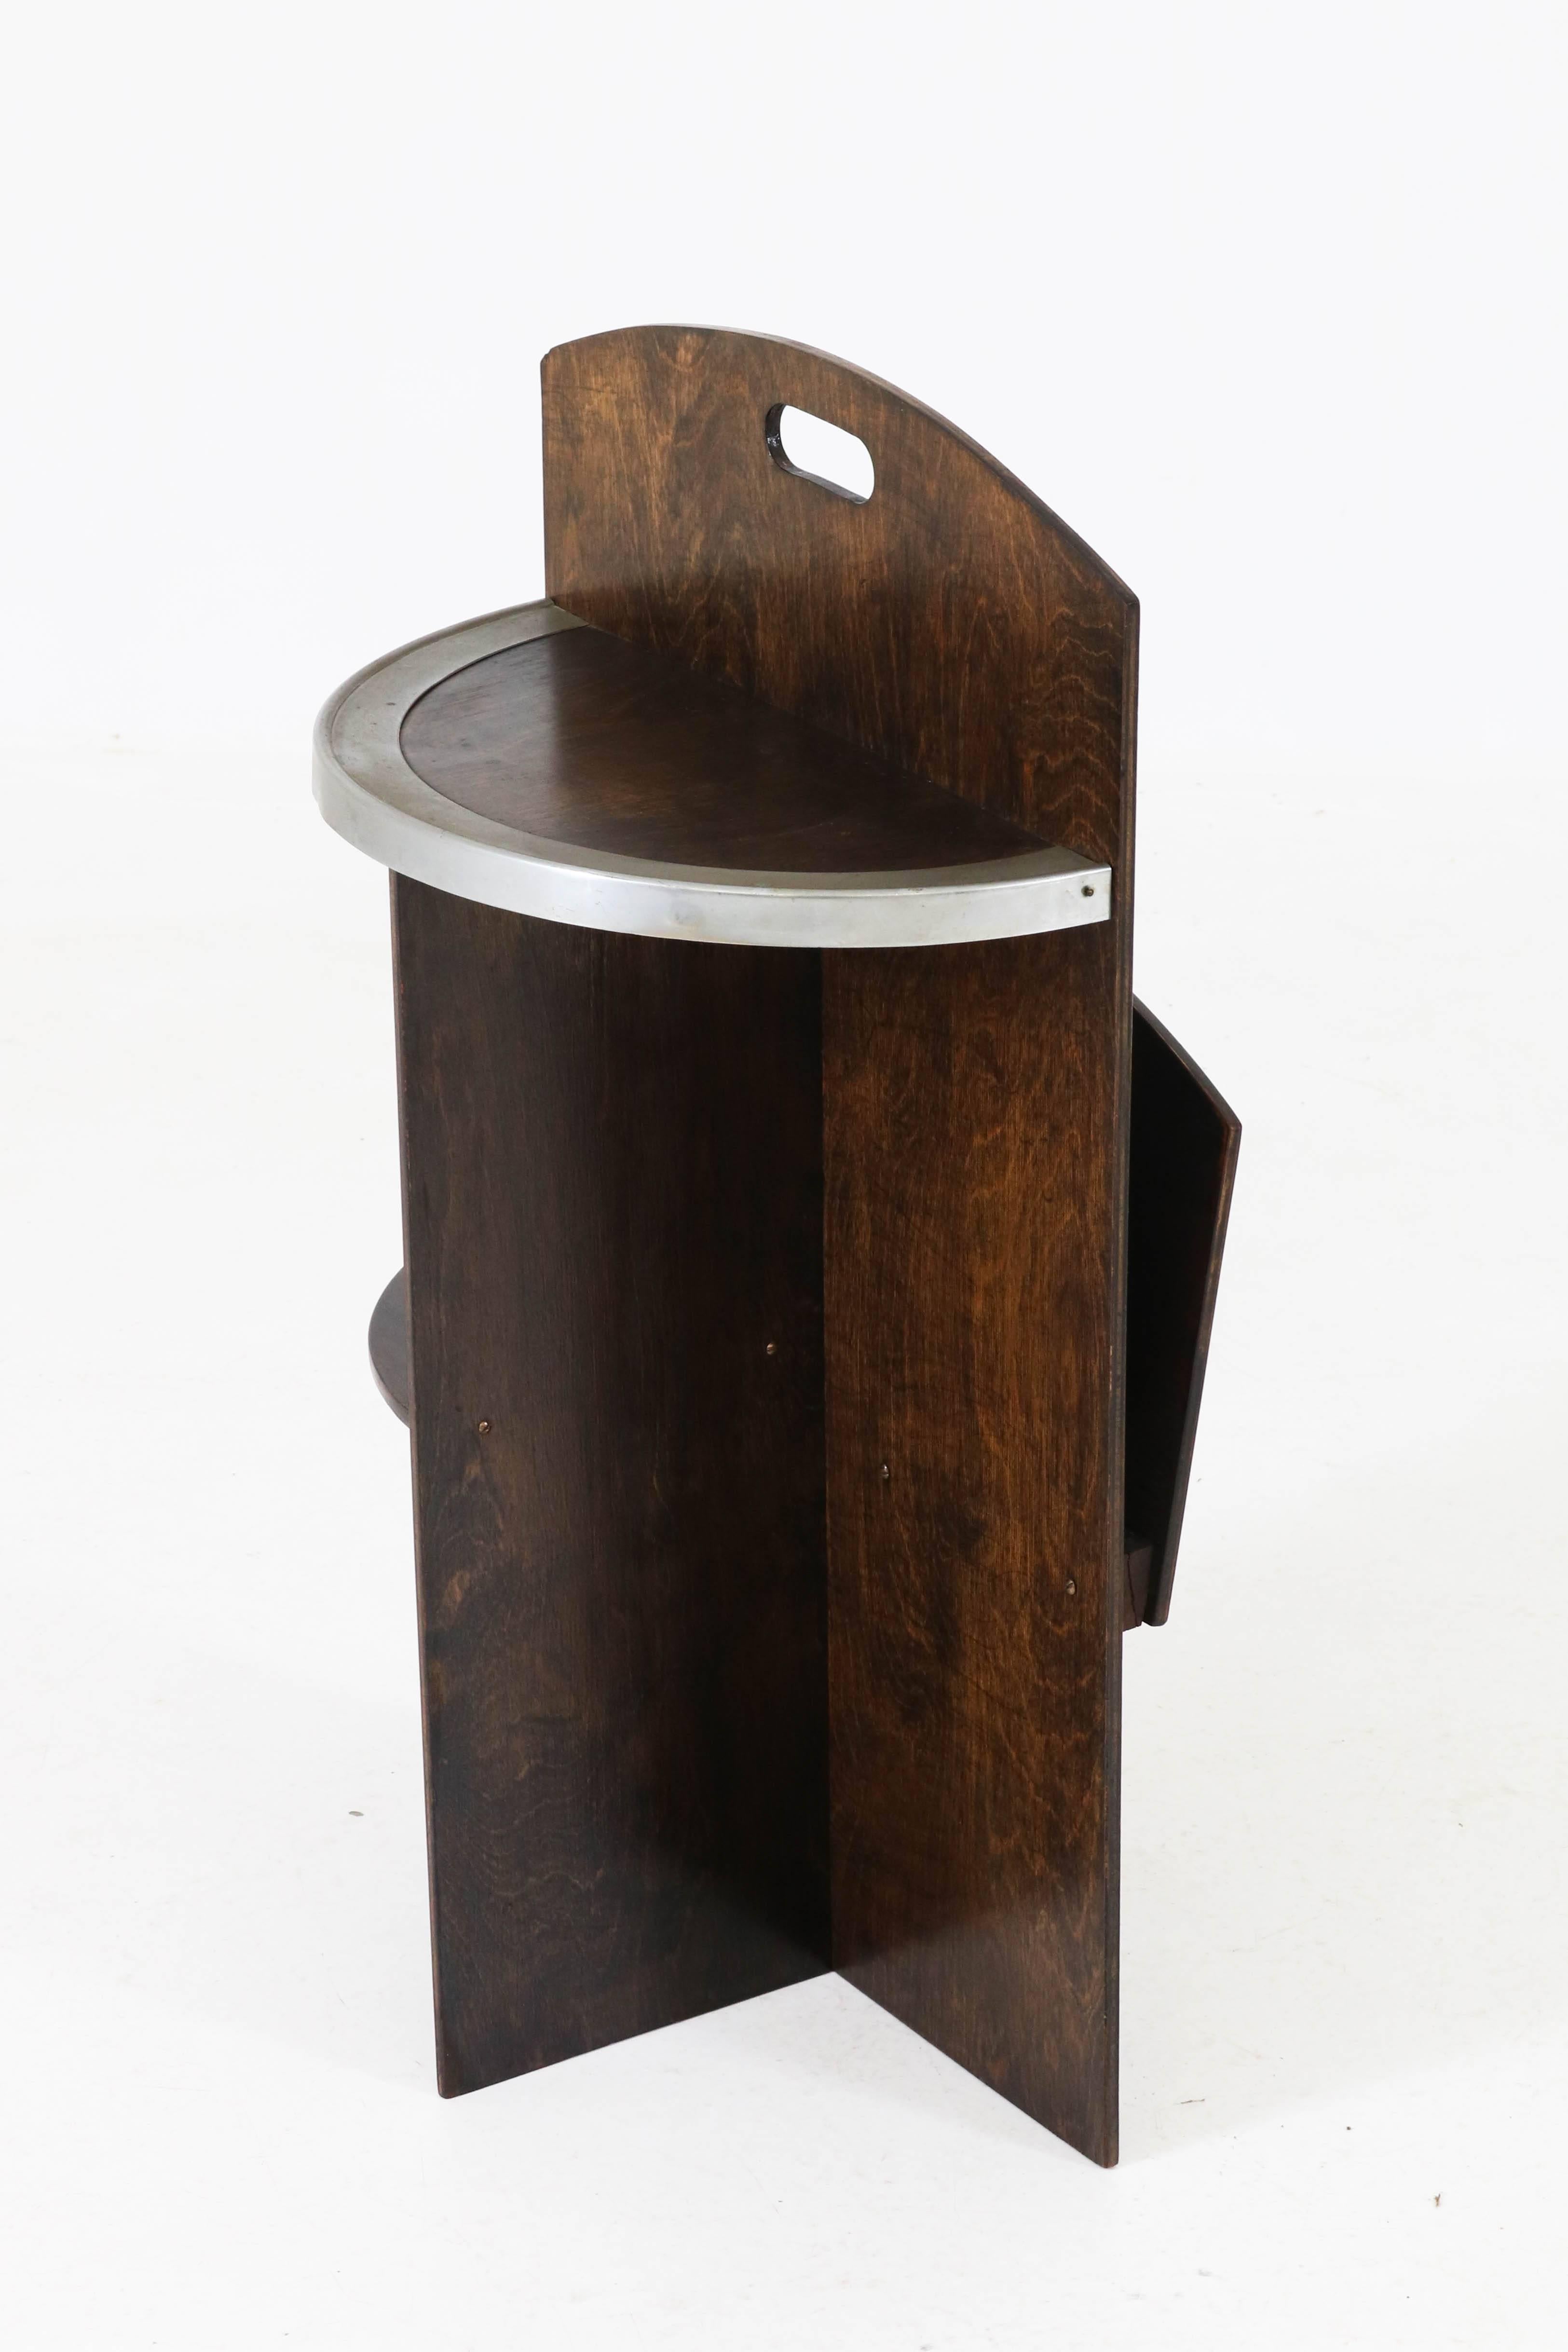 German Art Deco Bauhaus Style Plywood Table or Magazine Stand, 1930s